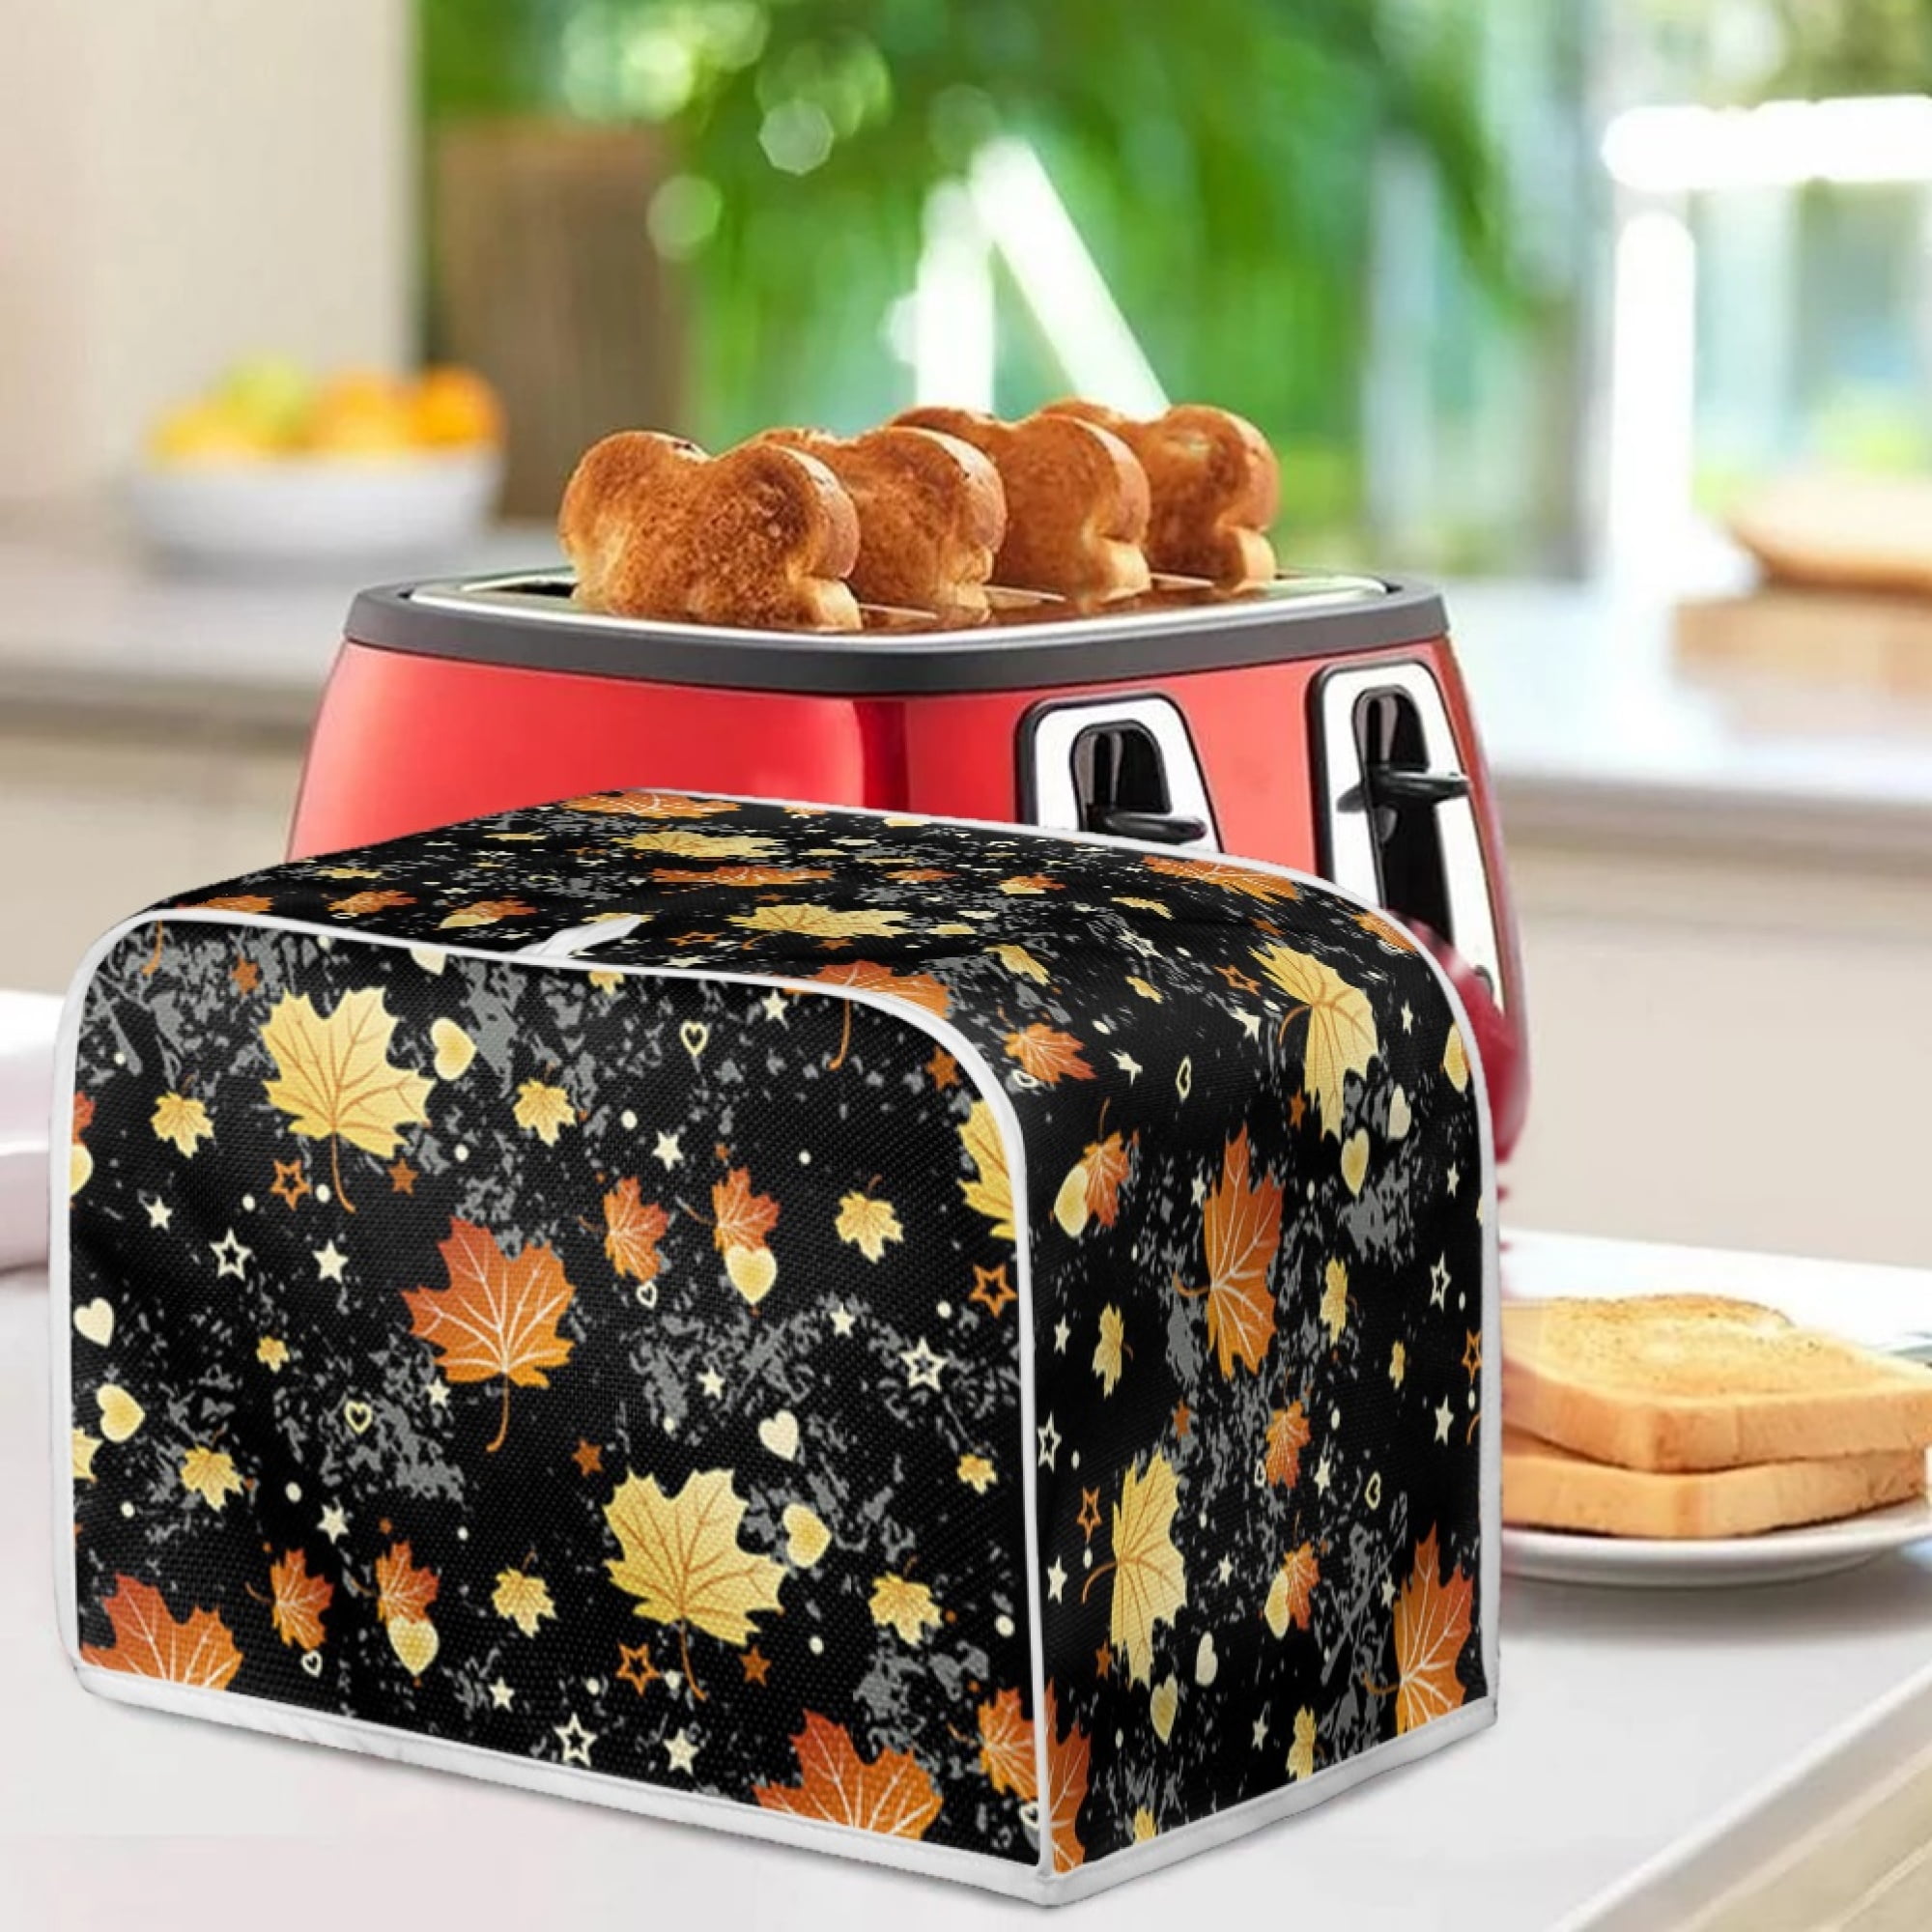 Upetstory Chicken Rooster Air Fryer Cover Dust Cover Red Kicthen Appliance  Cover Countertop Oven Cover Airfryer Covers with Storage Pocket and Handle